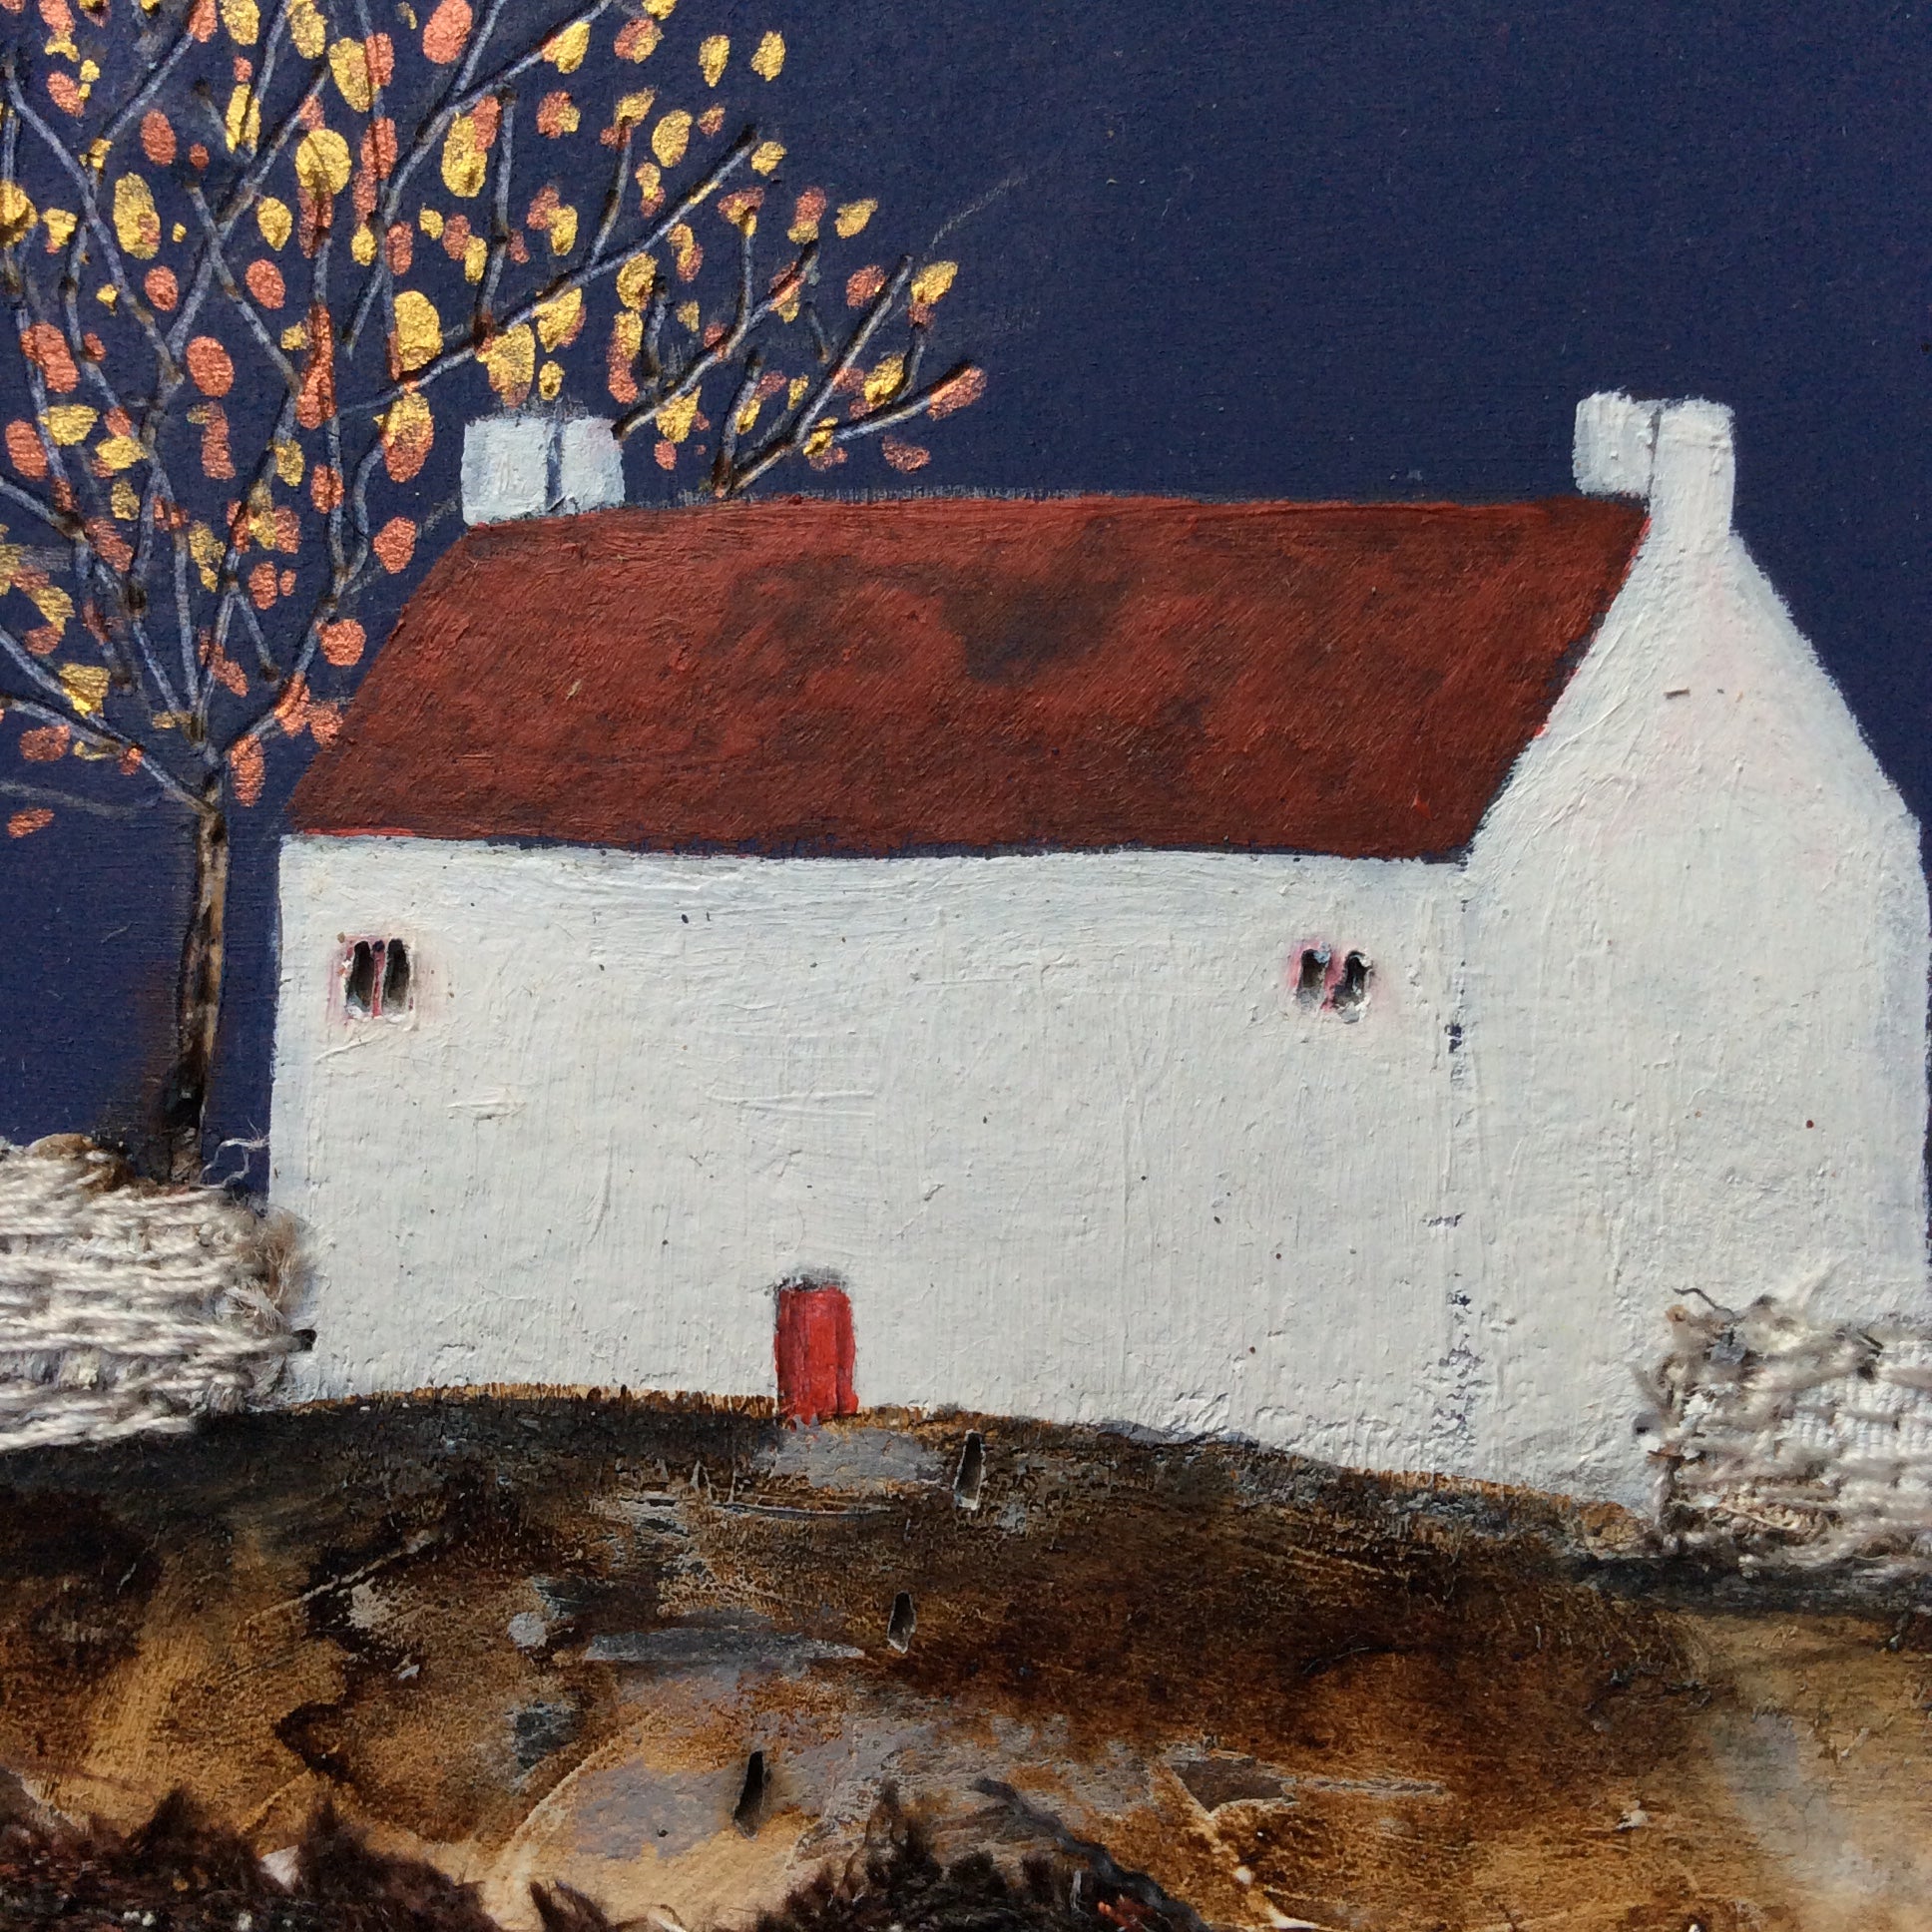 Mixed Media Art work by Louise O'Hara “Copper times Of Autumn"